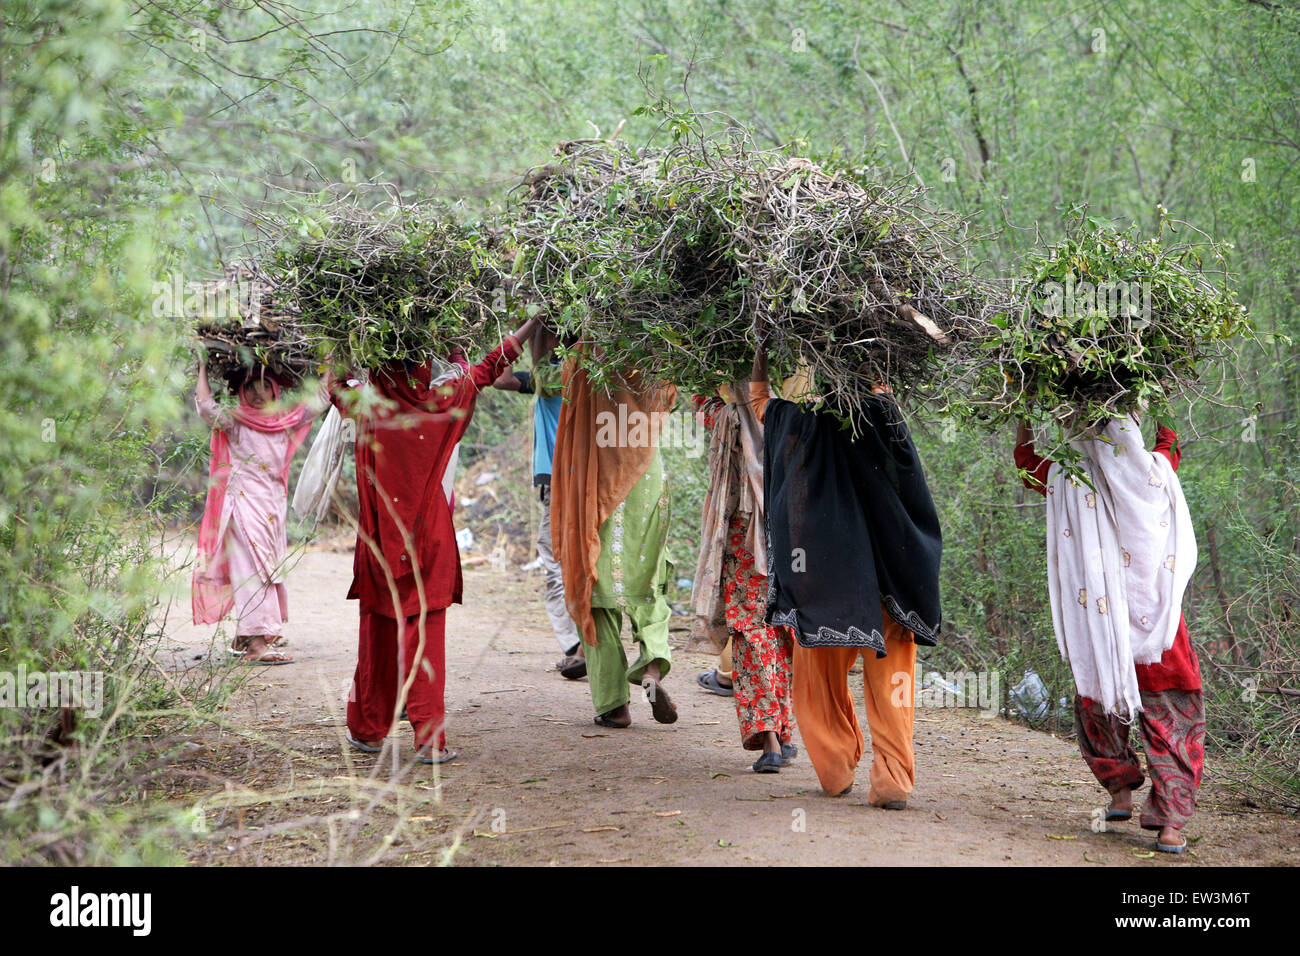 Women carry hay on their heads, Tamil Nadu, India Stock Photo